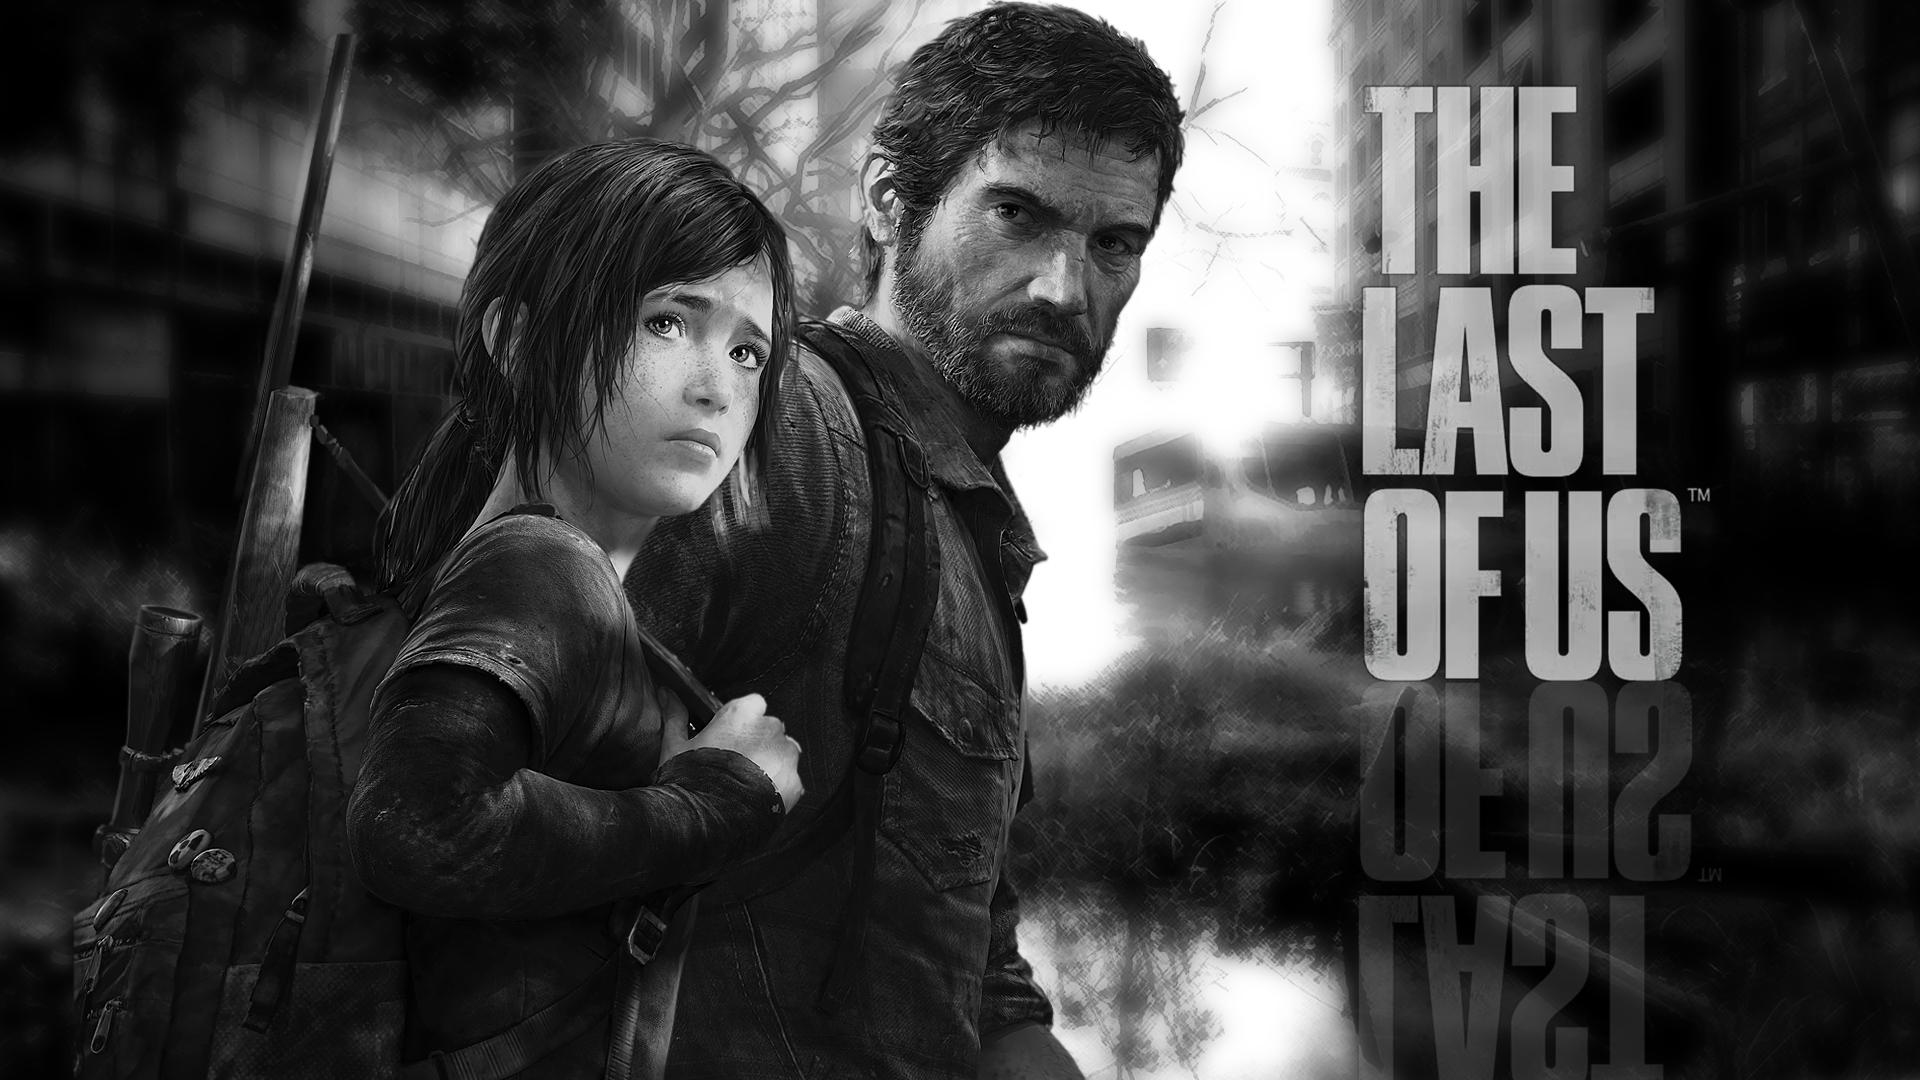 Last Of Us Background Images, HD Pictures and Wallpaper For Free Download